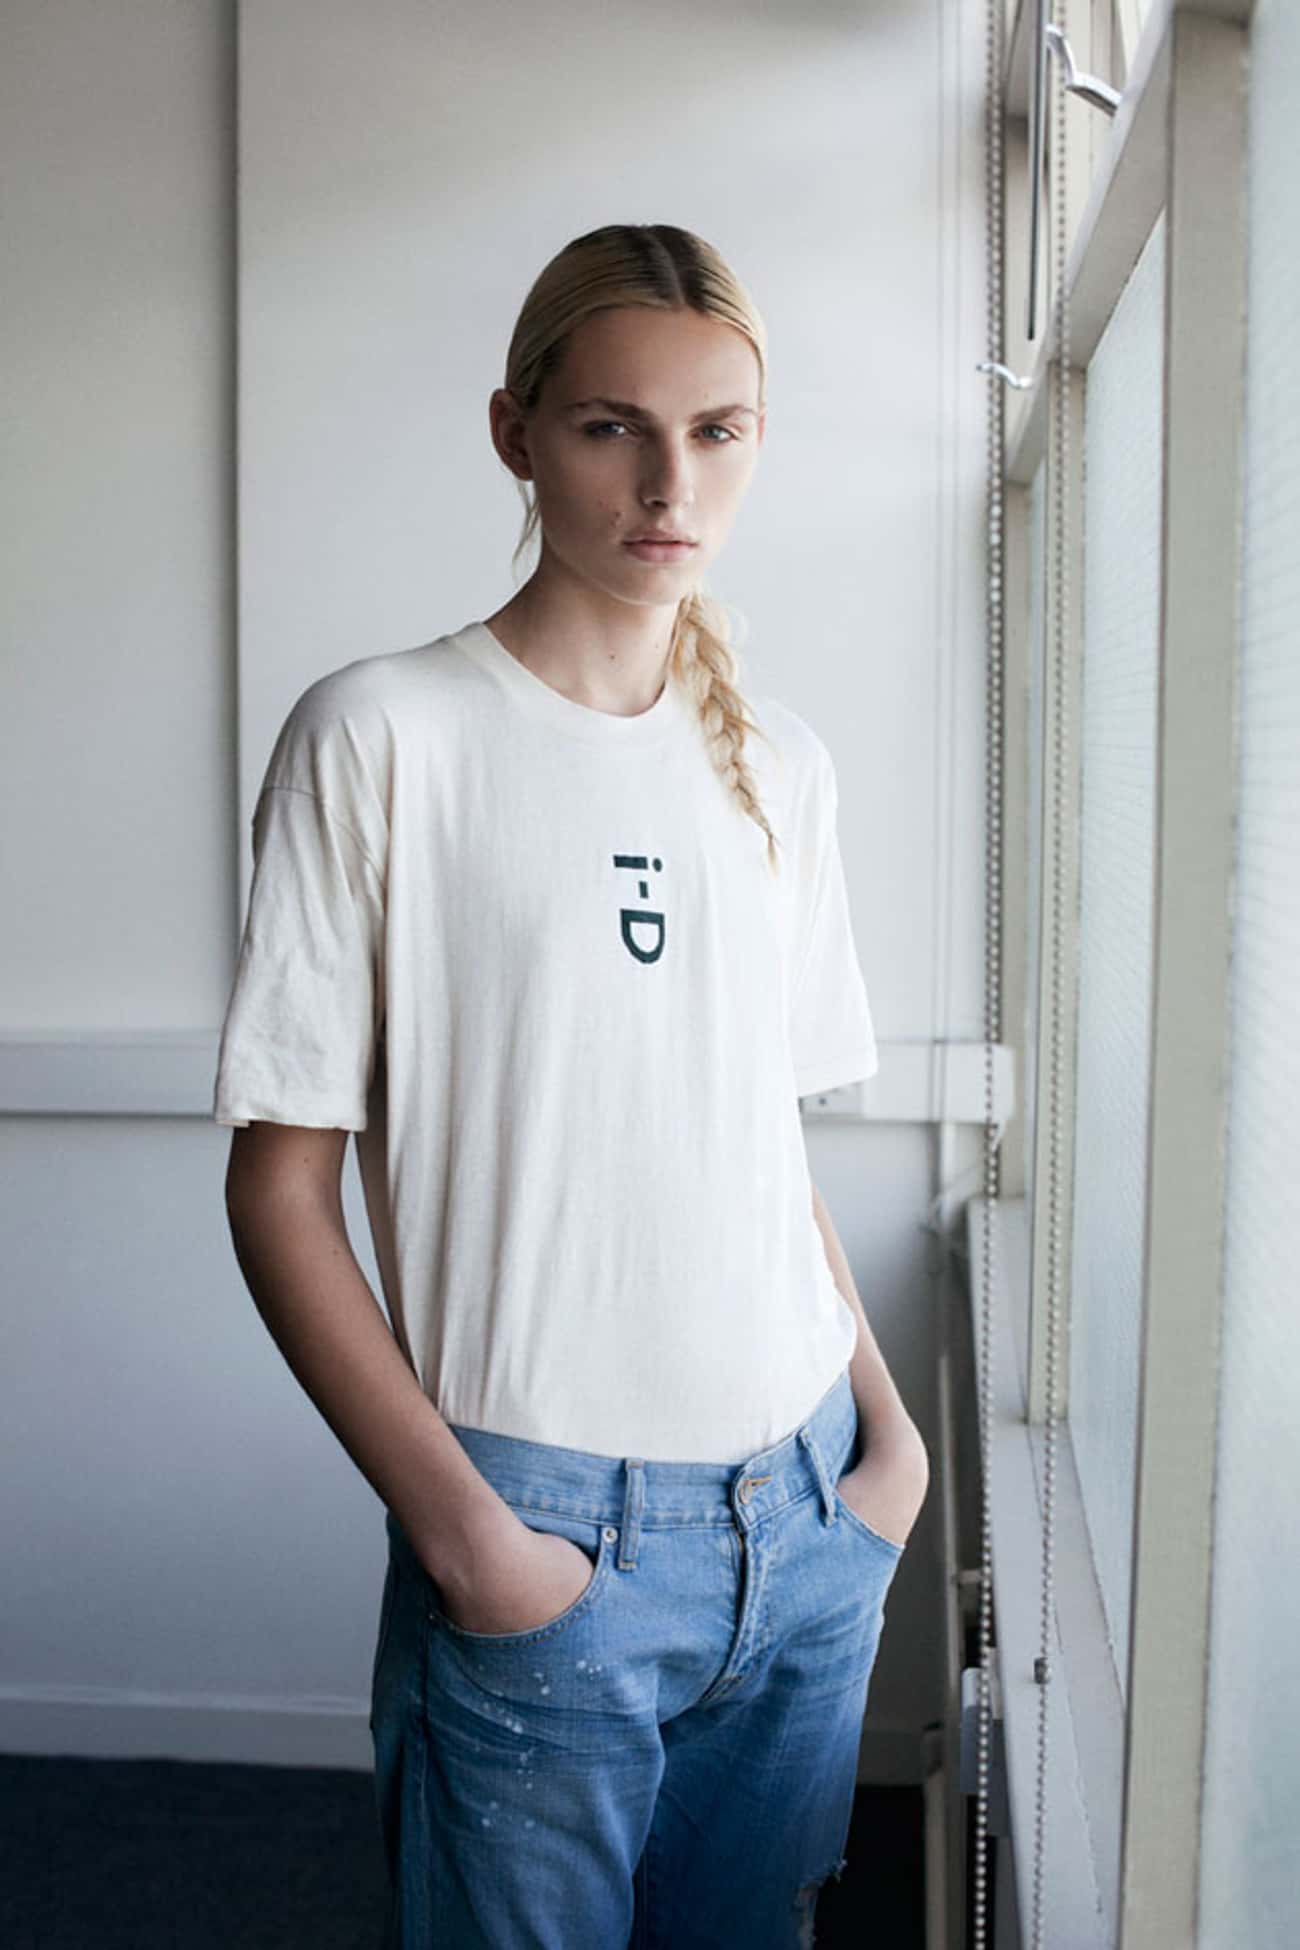 Andrej Pejic in White Cotton T-Shirt with Denim Jeans